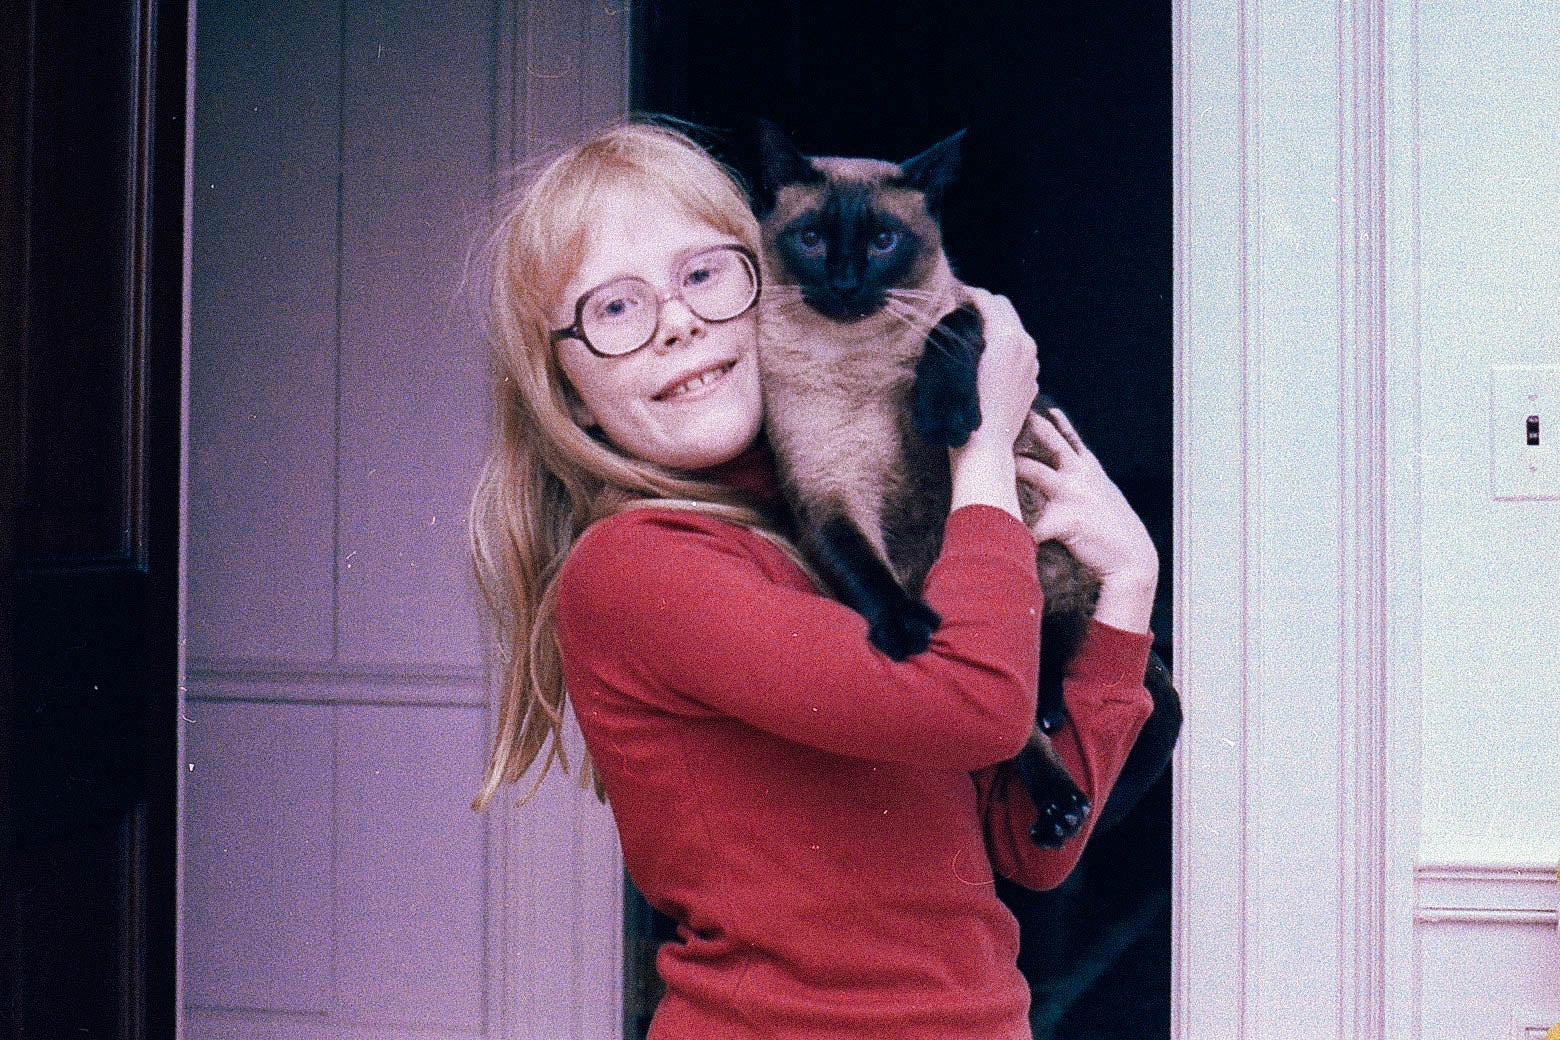 Amy Carter, in a red shirt and glasses, holding her Siamese cat in the White House.